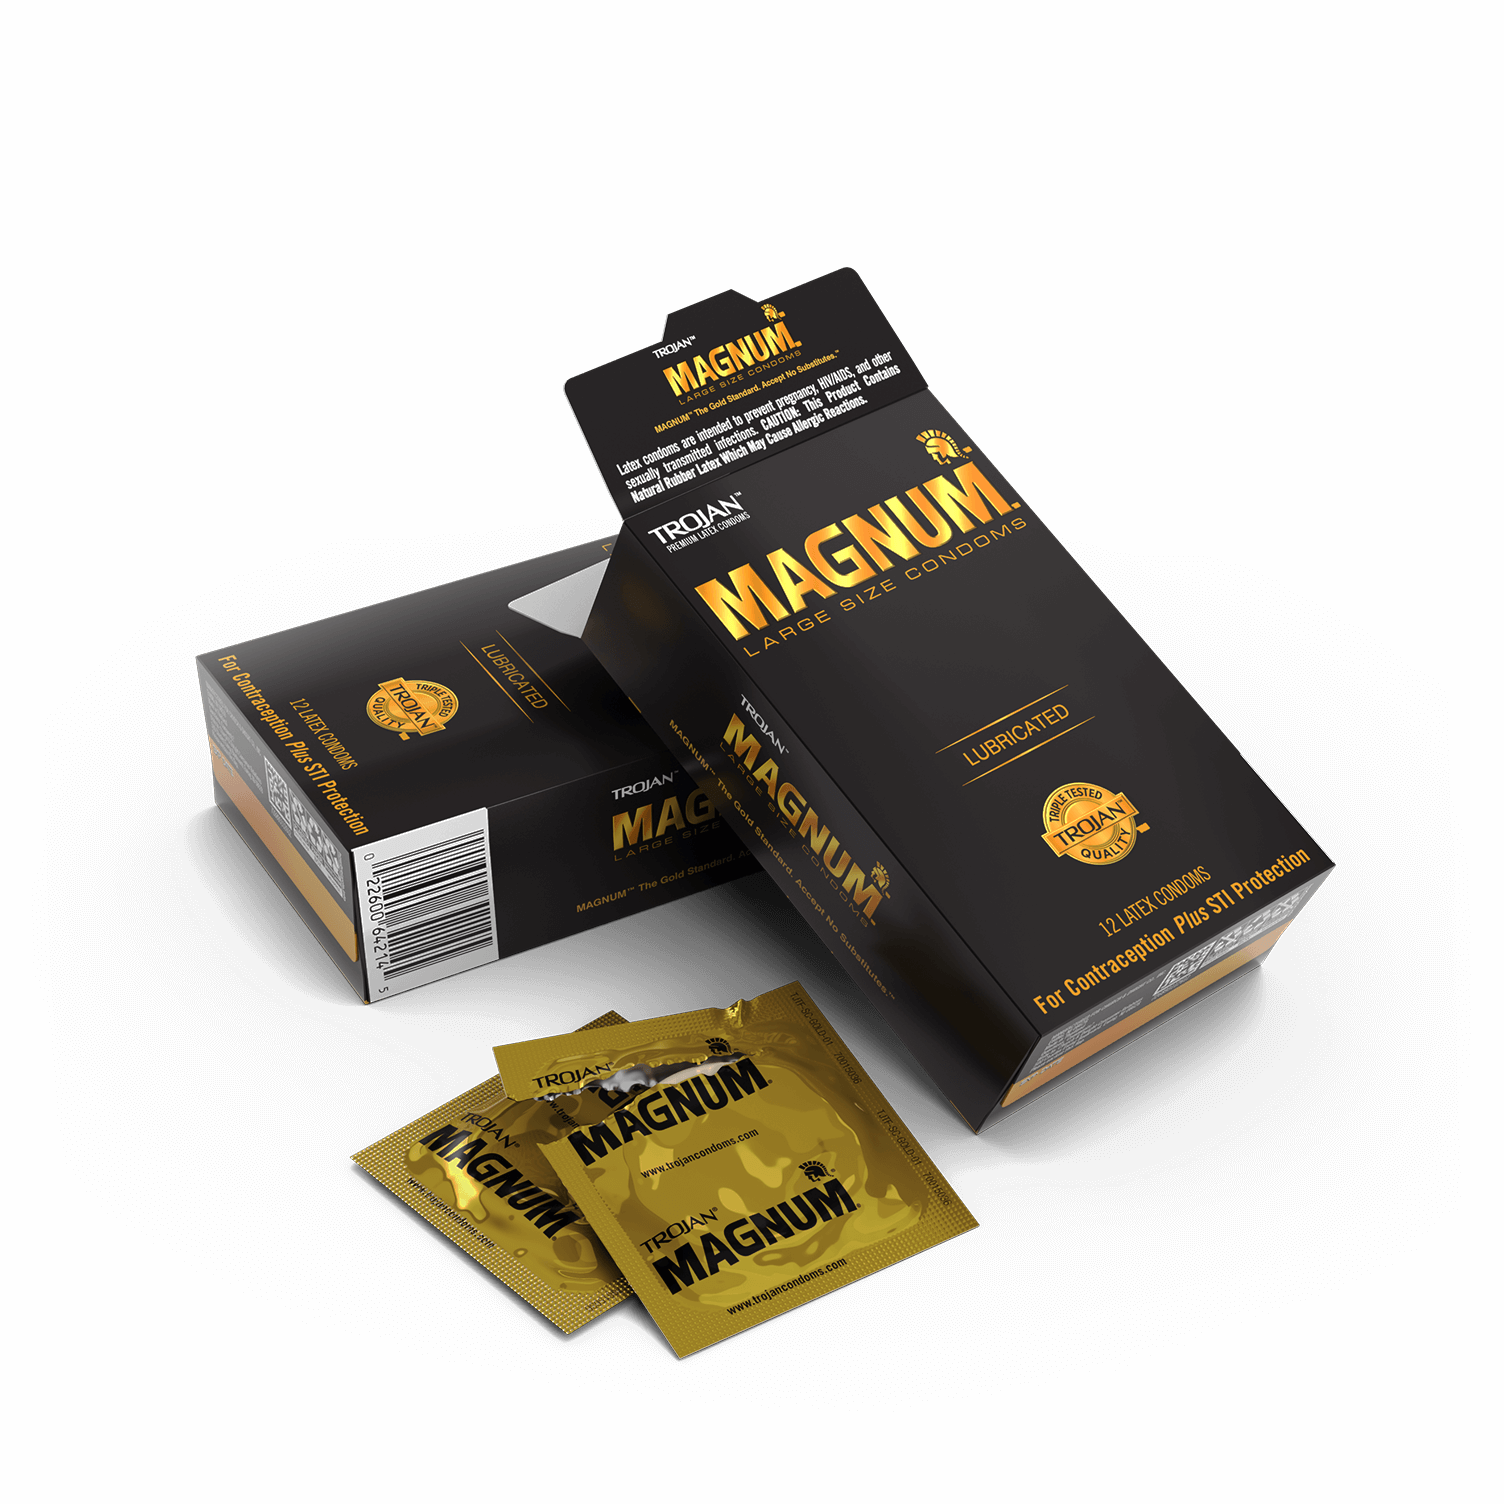 Magnum Large Sized Lubricated Condom package and gold wrapper.